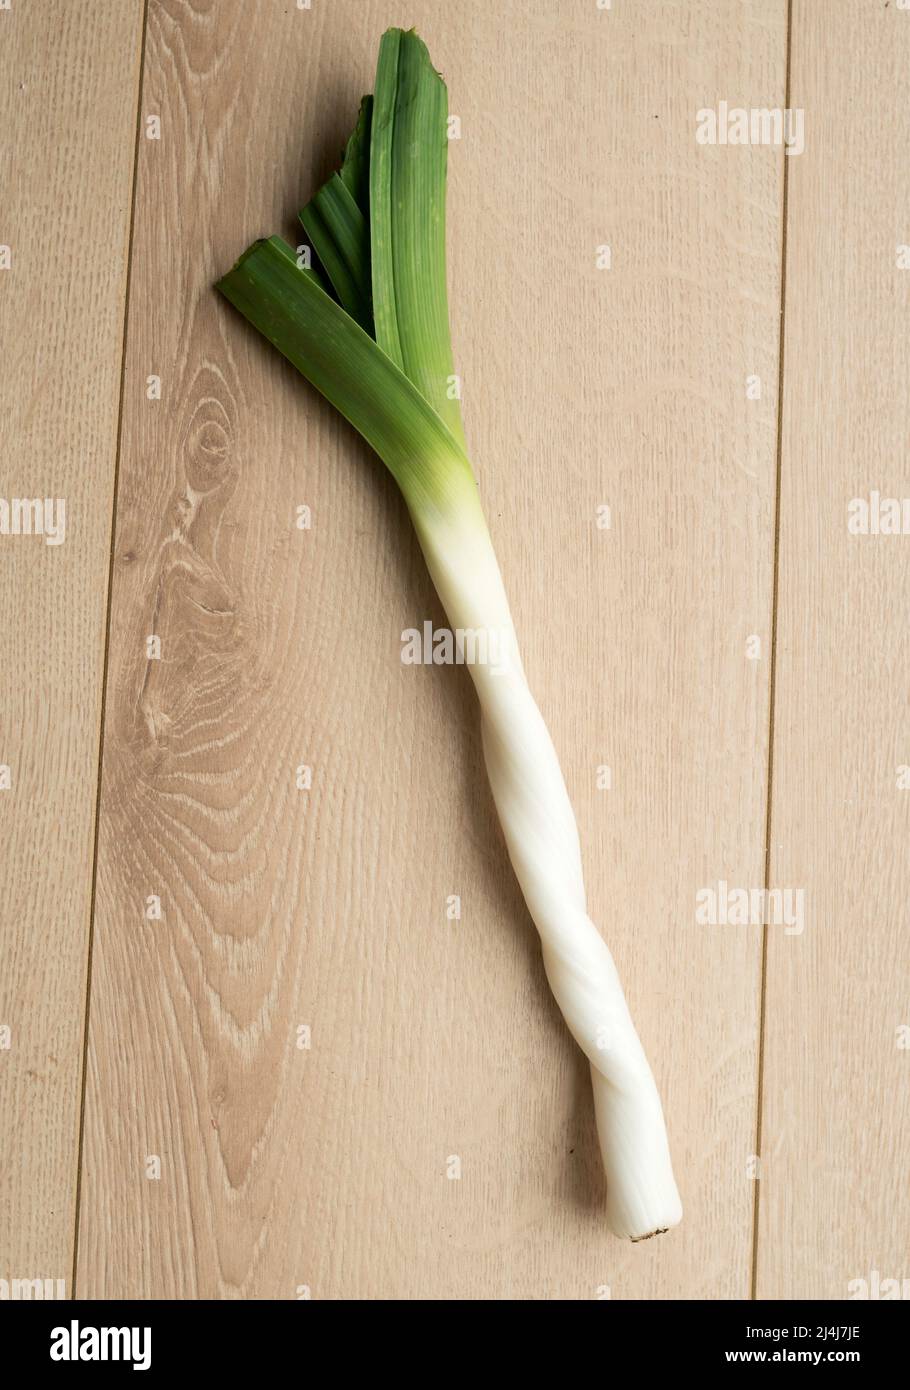 A leek plant grown twisted in the shape of a barley sugar stick, England, UK Stock Photo